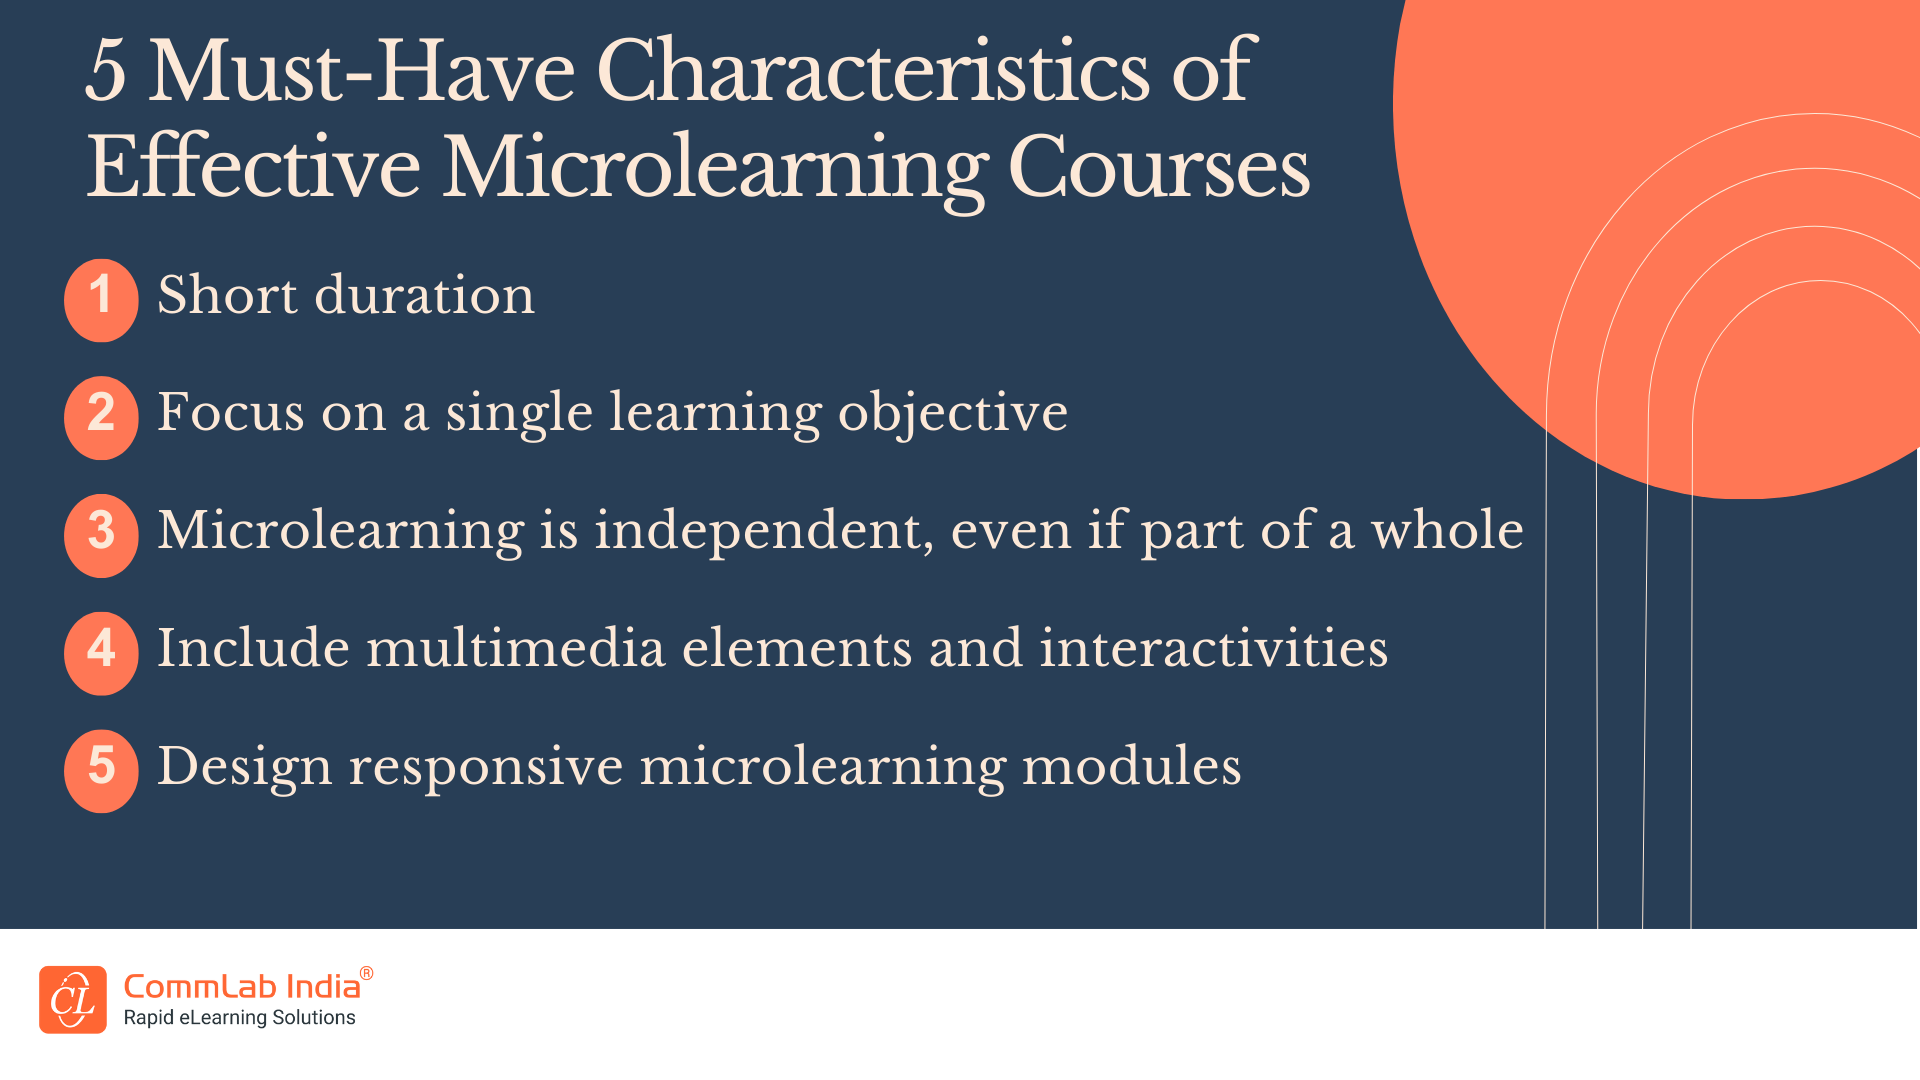 5 Must-Have Characteristics of Effective Microlearning Courses